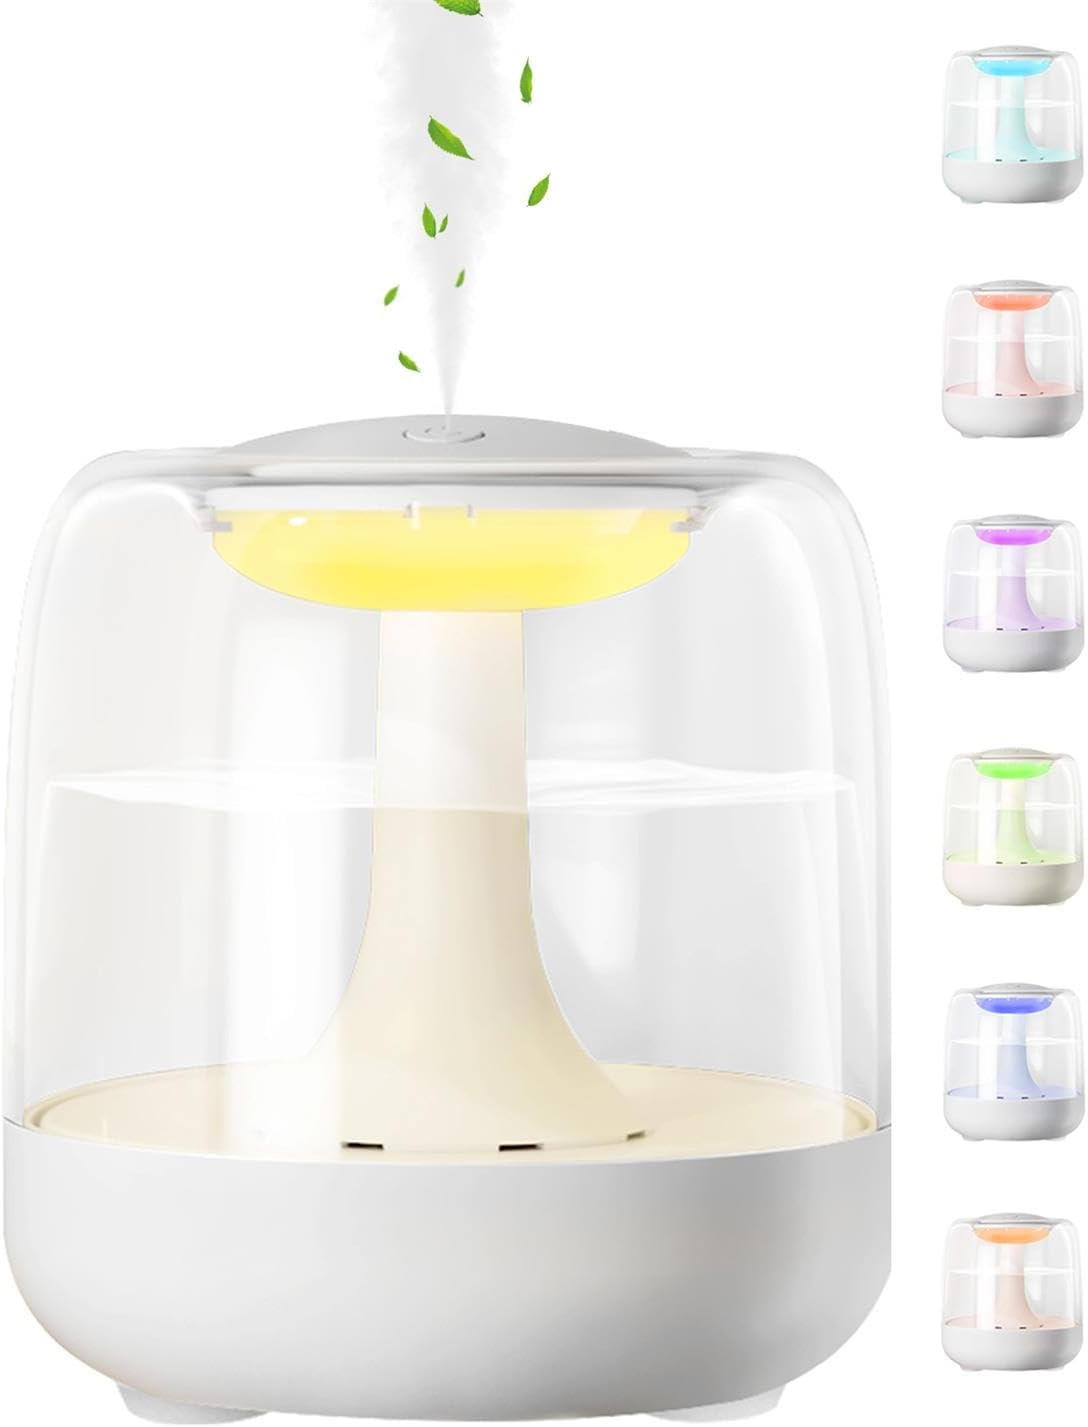 Mini Cool Mist Humidifier for Home Bedroom, 650ml Top Fill USB Personal Desktop Humidifier with Colorful LED Night Light for Plants, Office Room, Auto Shut-Off, 2 Mist Modes, Super Quiet, White